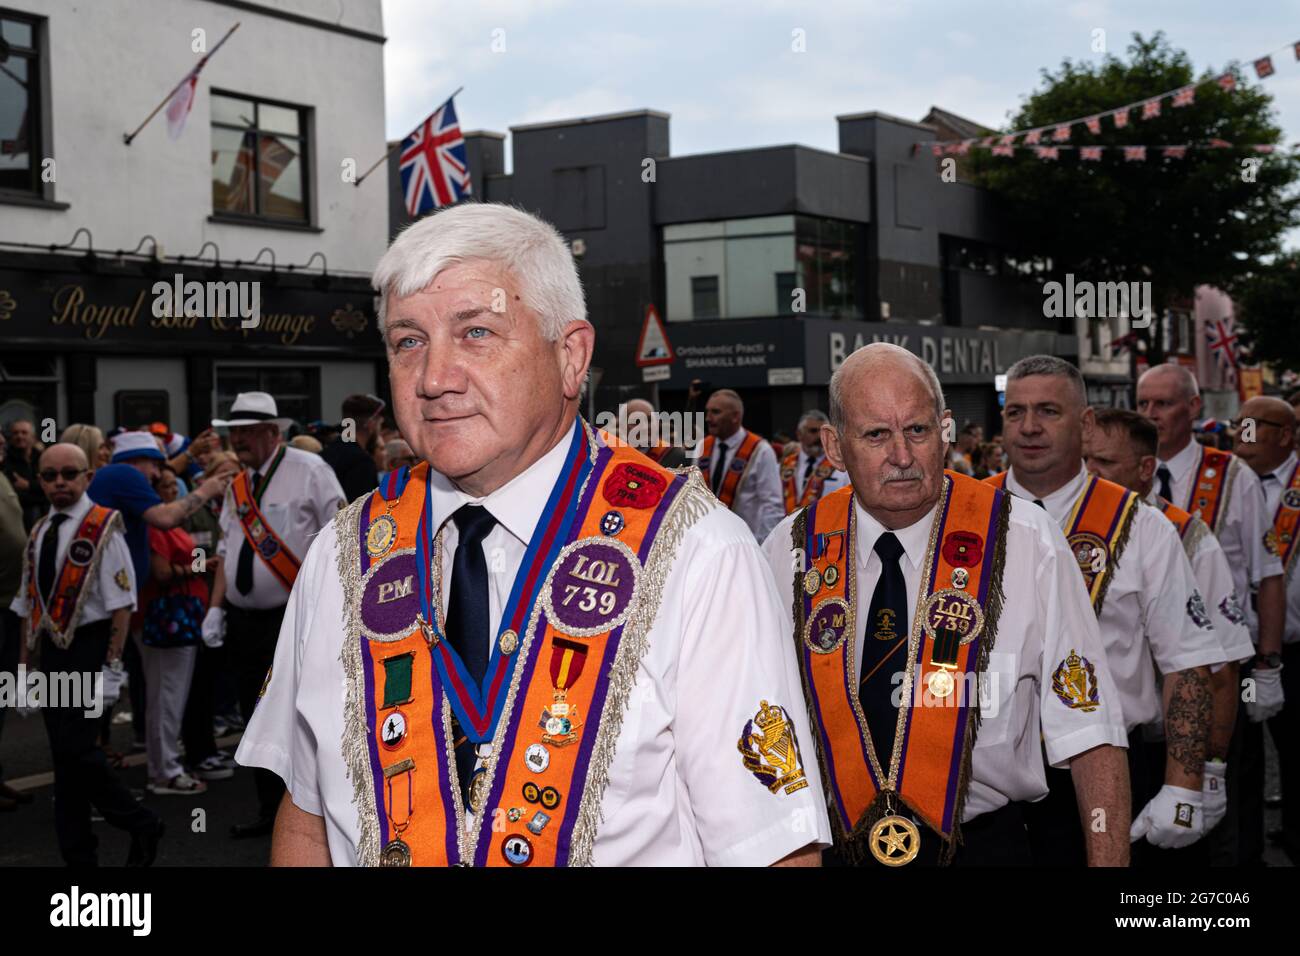 Orangemen march through the staunchly Loyalist Shankill Road during the annual July 12th parades. The annual 12th of July Orange Order parades took place this year after a hiatus due to the pandemic. Despite speculations of a potentially heated weekend due to the Brexit protocols and recent related tensions as well as certain contentions bonfire builds throughout the North, the festivities passed peacefully. The parade season marks the anniversary of the protestant King William of Orange's victory over the Catholic forces of King James at the Battle of the Boyne in 1690. Stock Photo